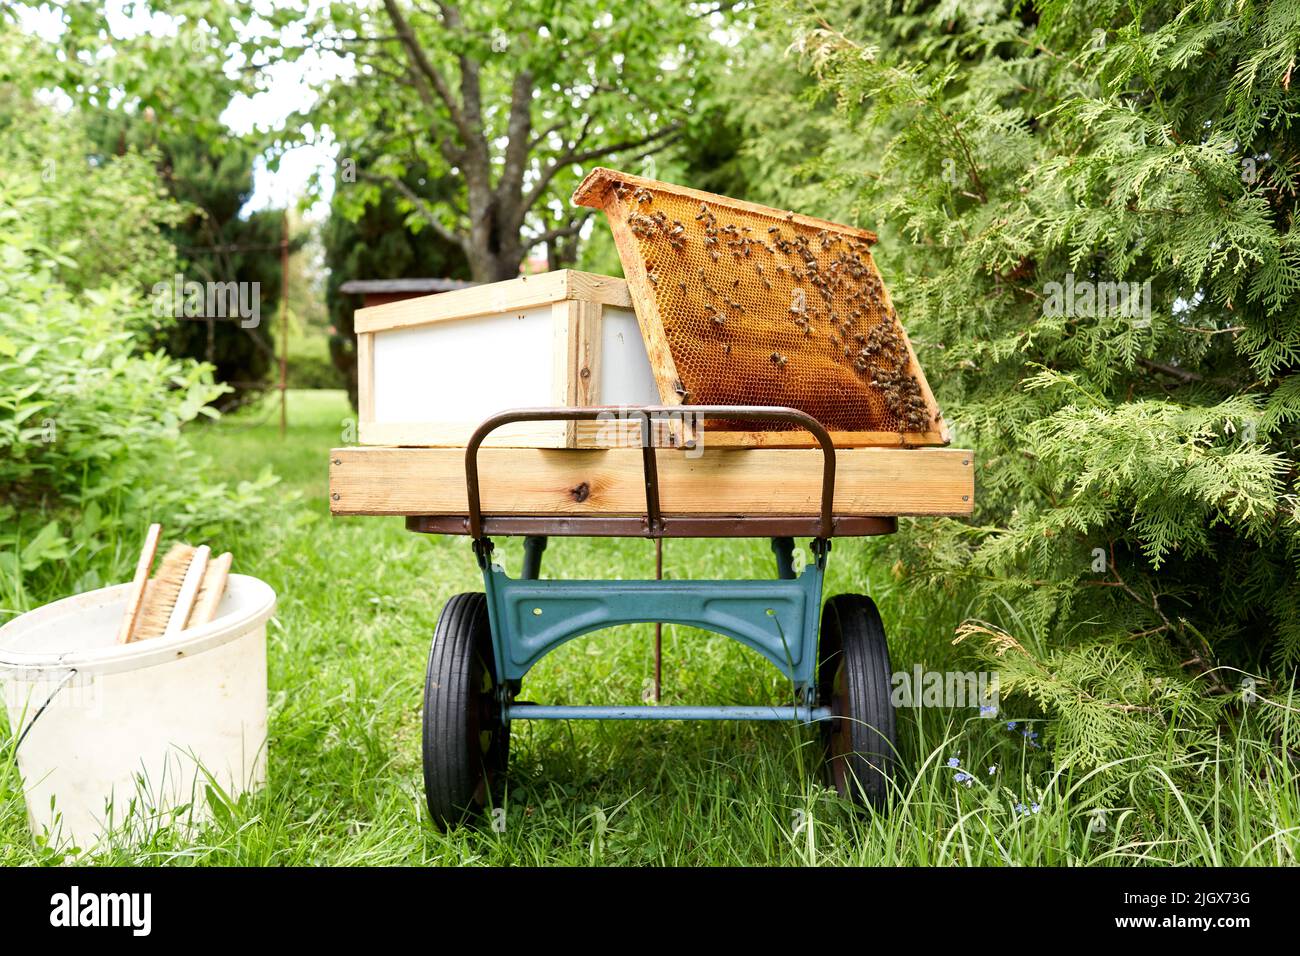 Wheelbarrow with tools and a panel of an artificial hive Stock Photo